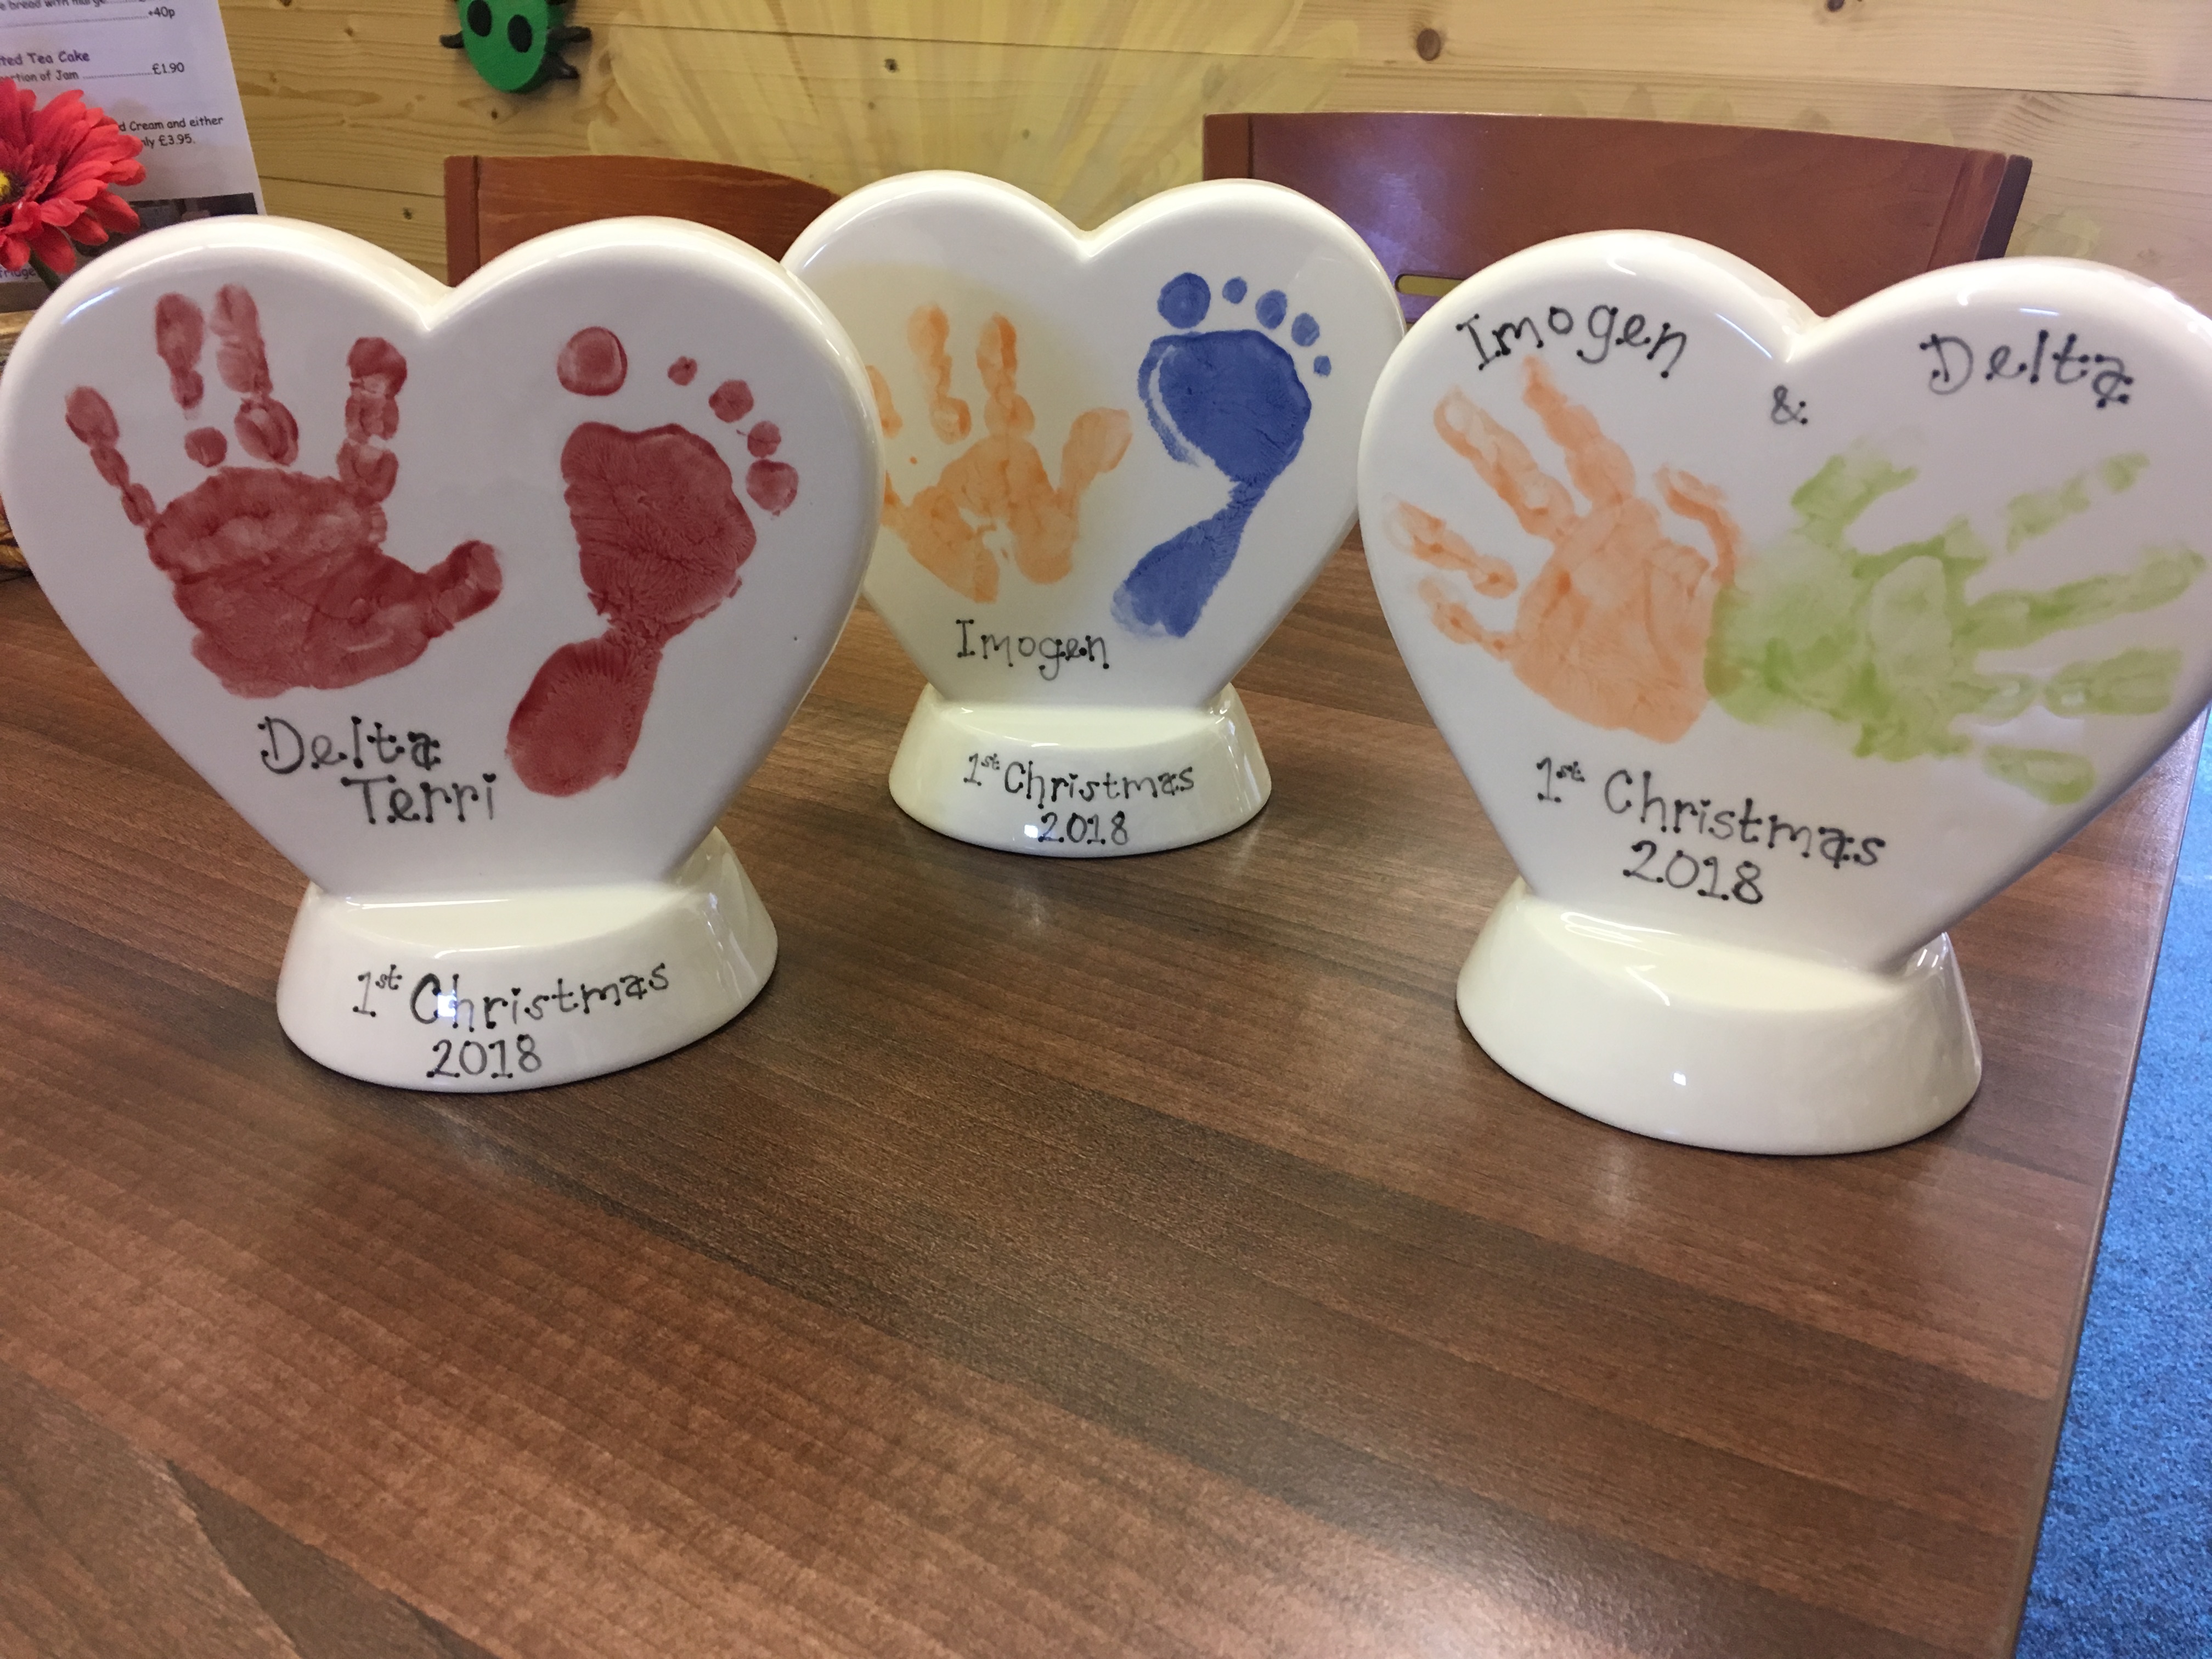 Hand prints on pottery